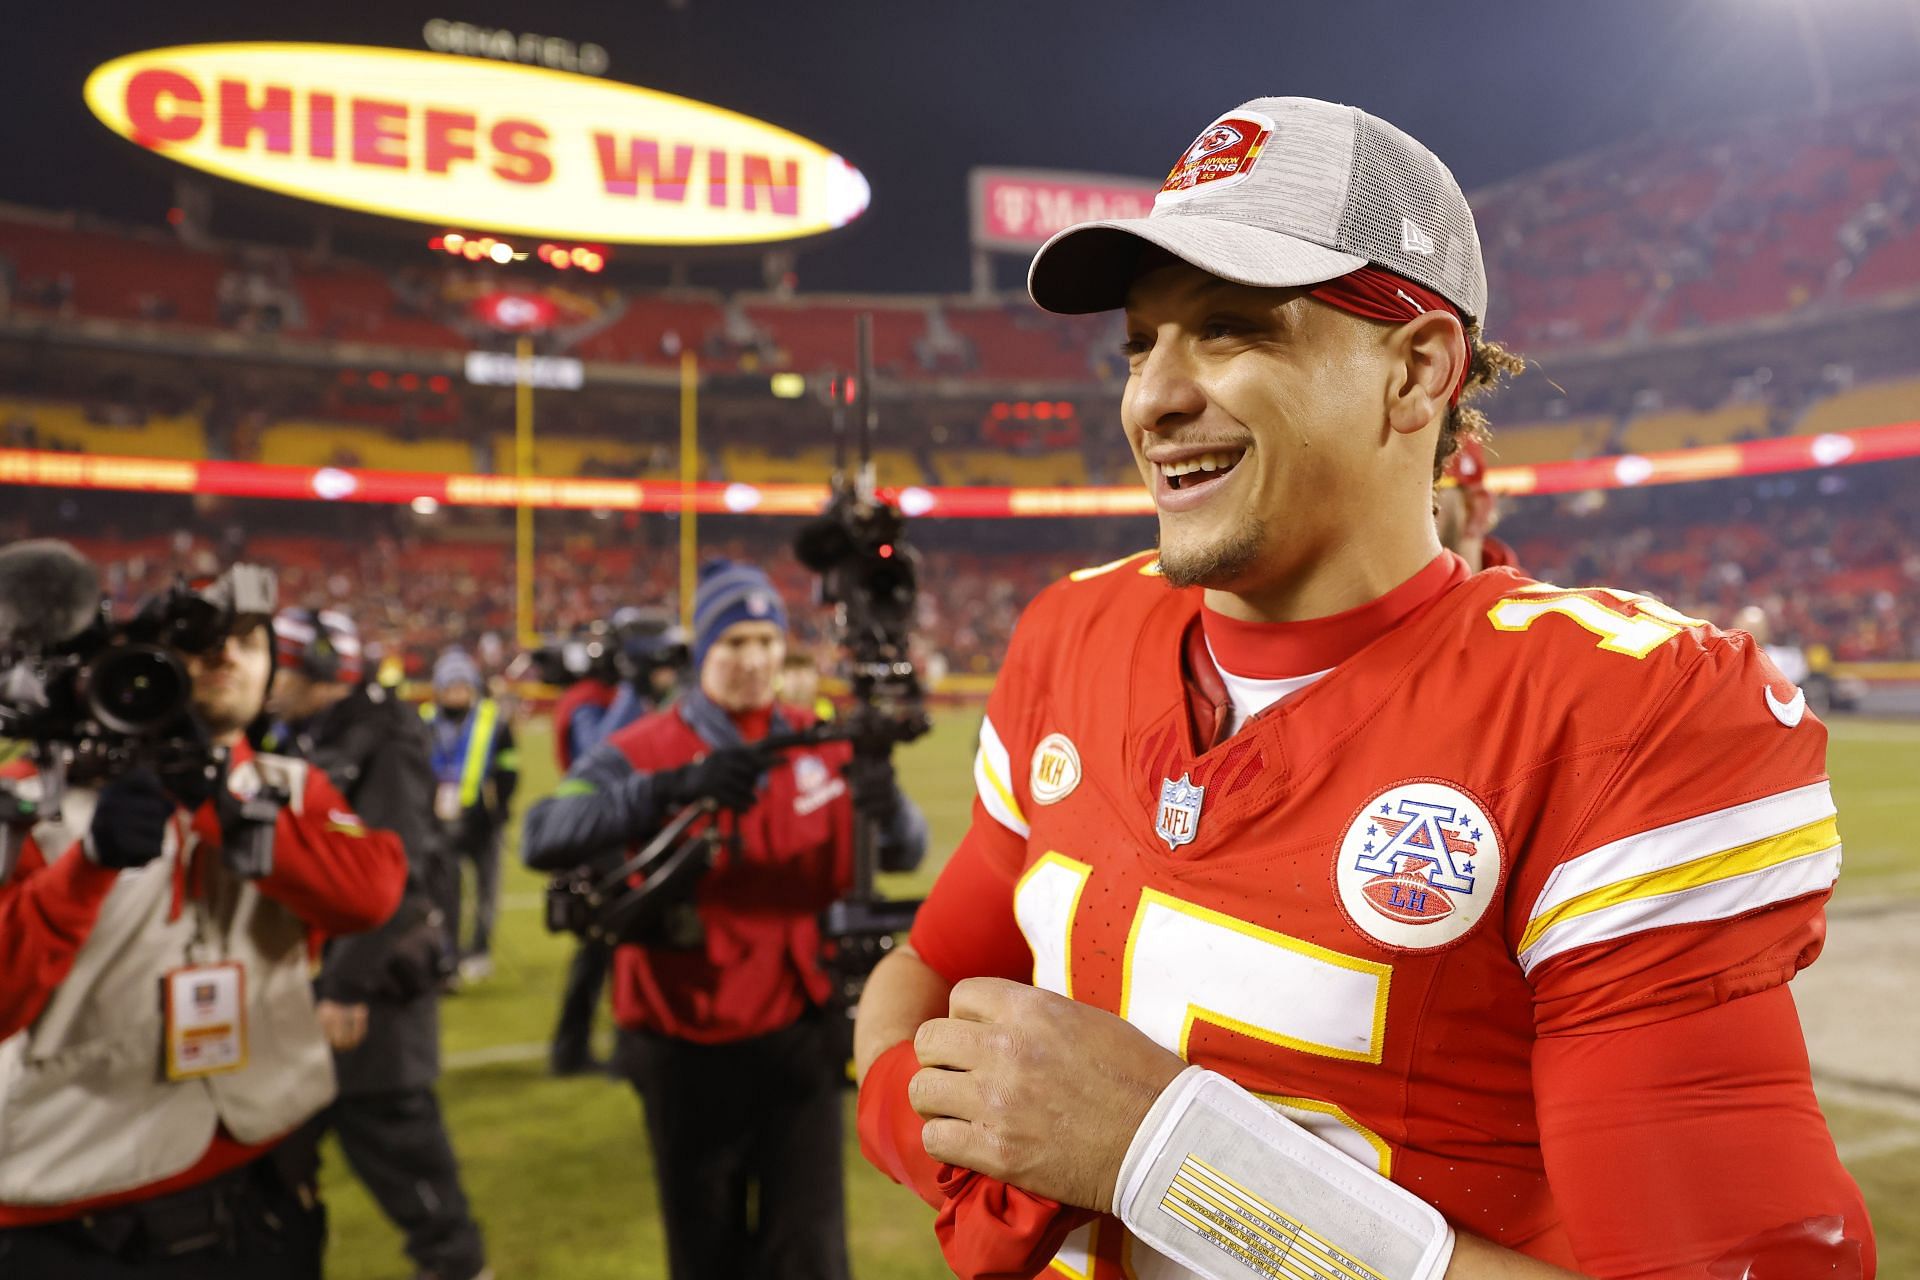 Patrick Mahomes was named to the Pro Bowl